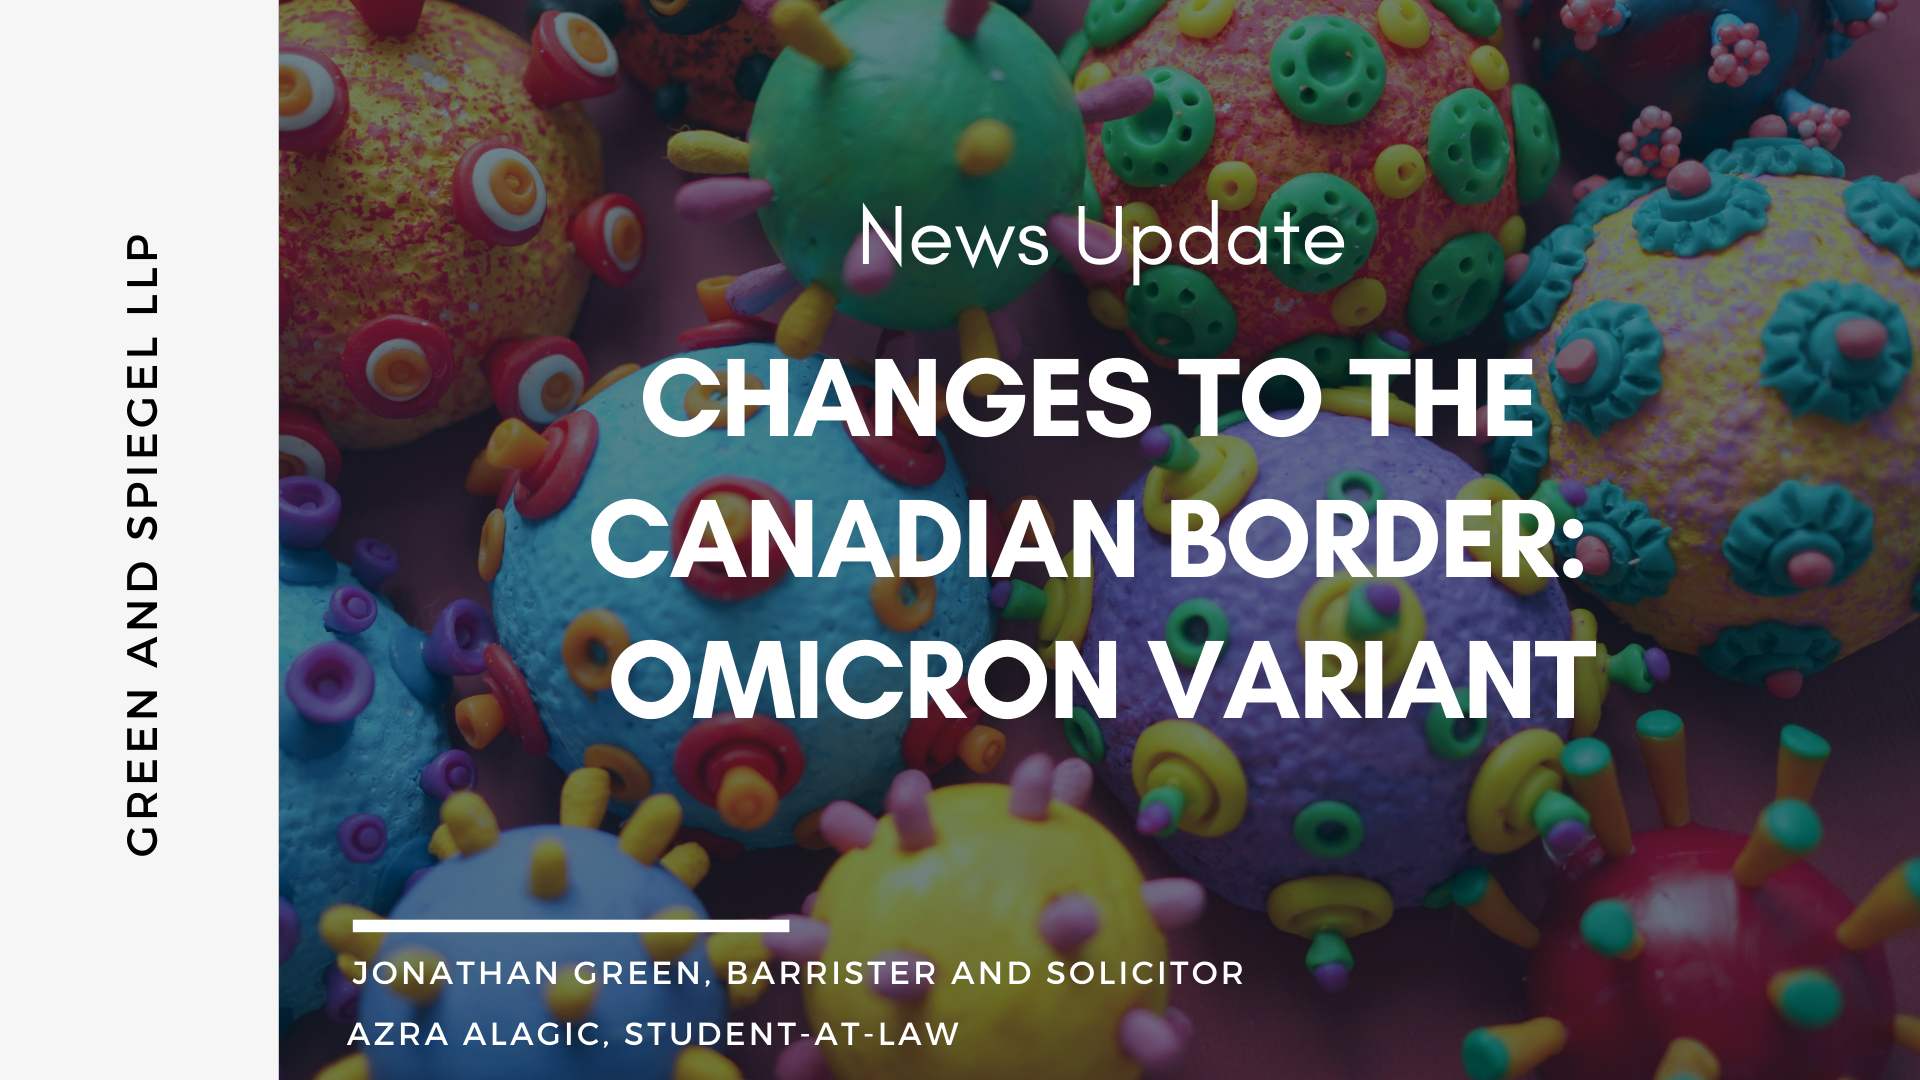 CHANGES TO THE CANADIAN BORDER: OMICRON VARIANT